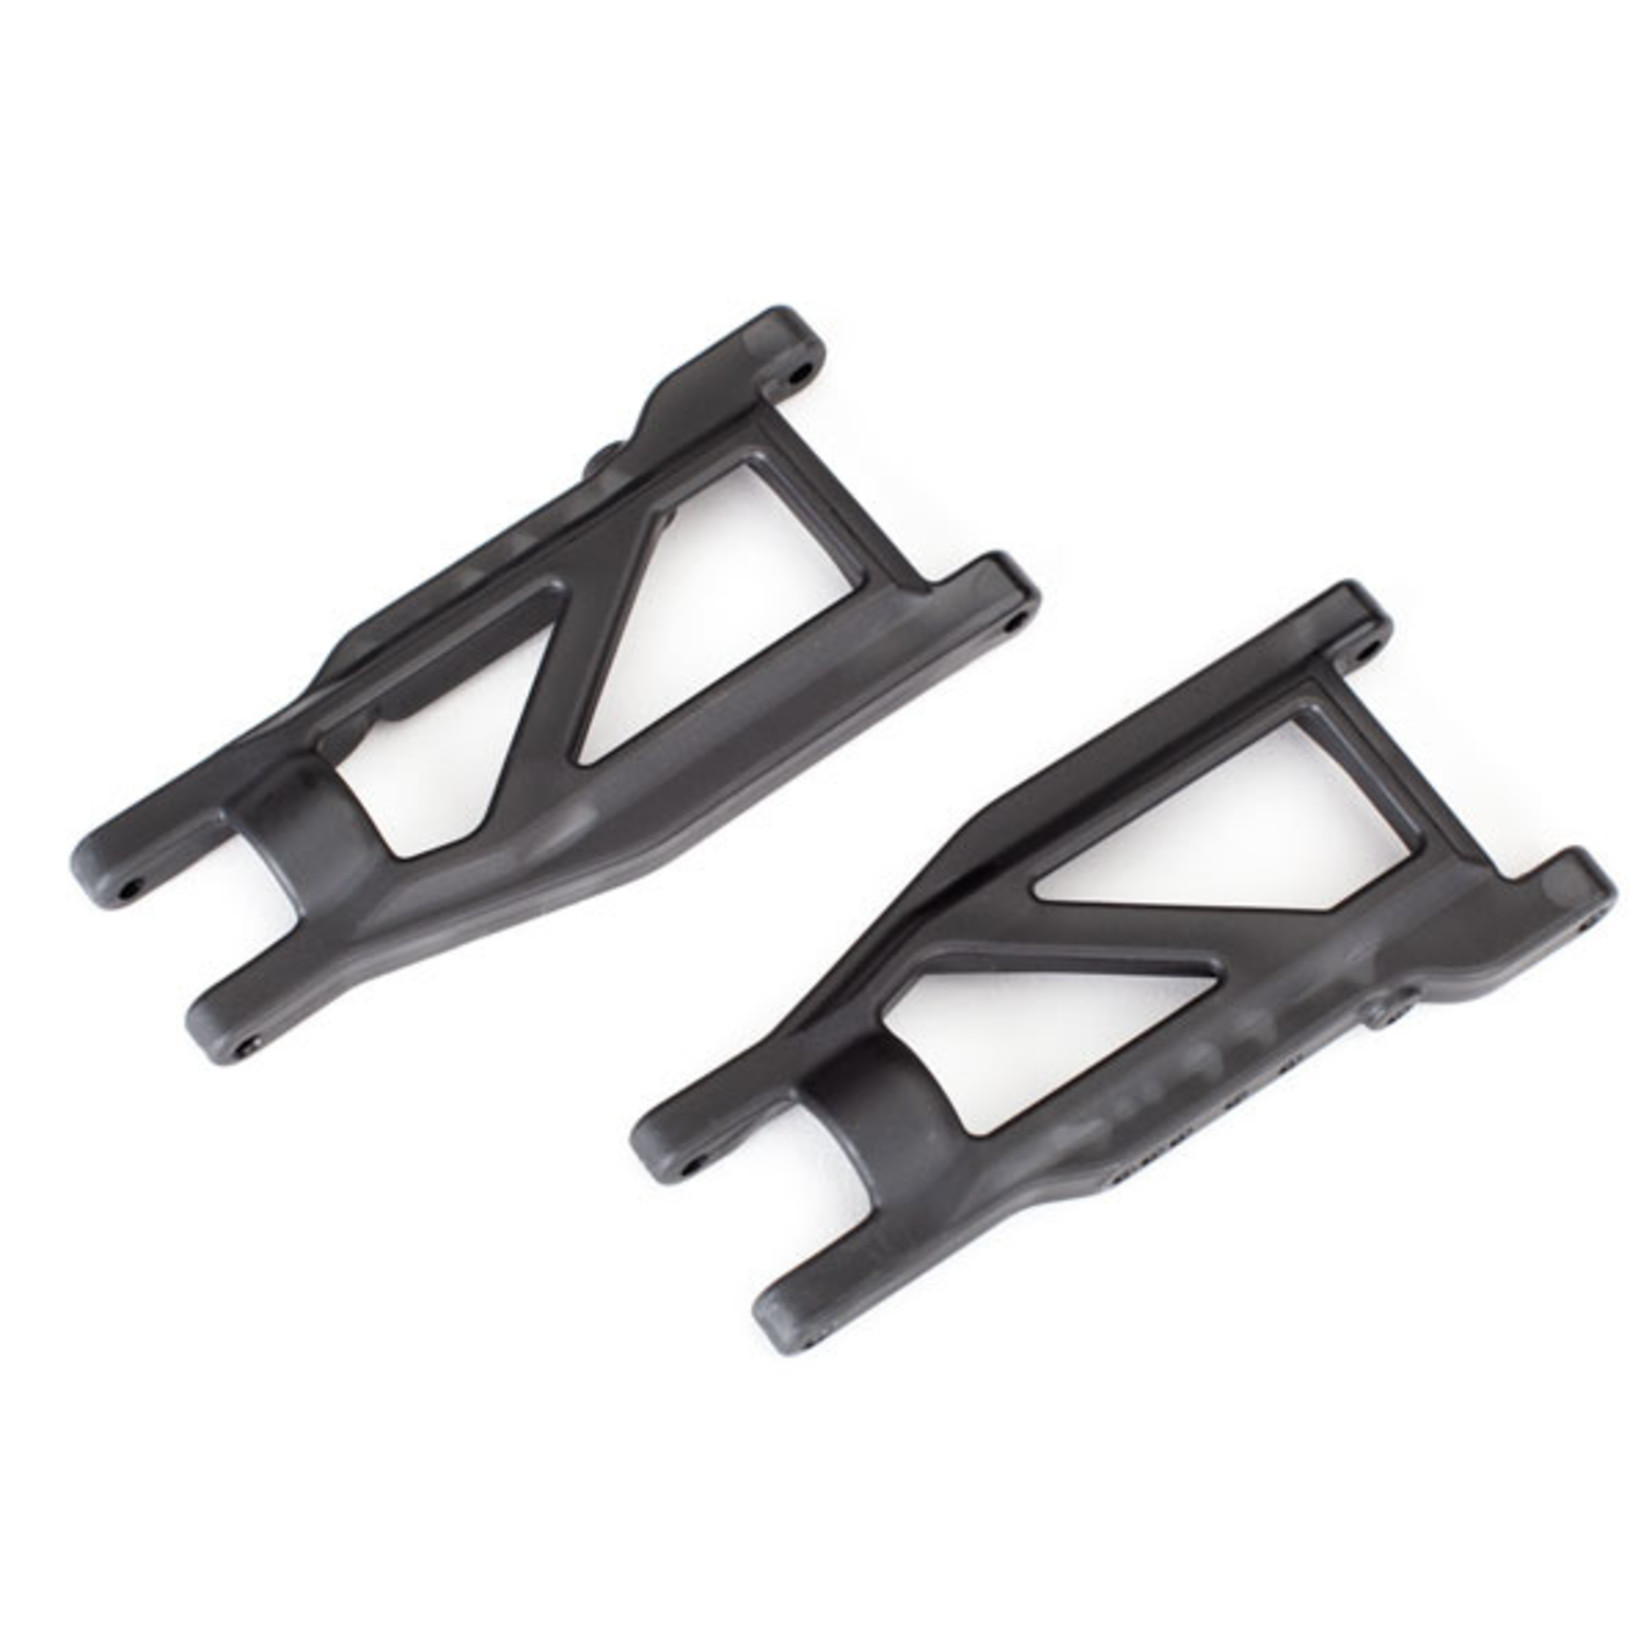 Traxxas 3655R - Suspension arms, front/rear (left & right)